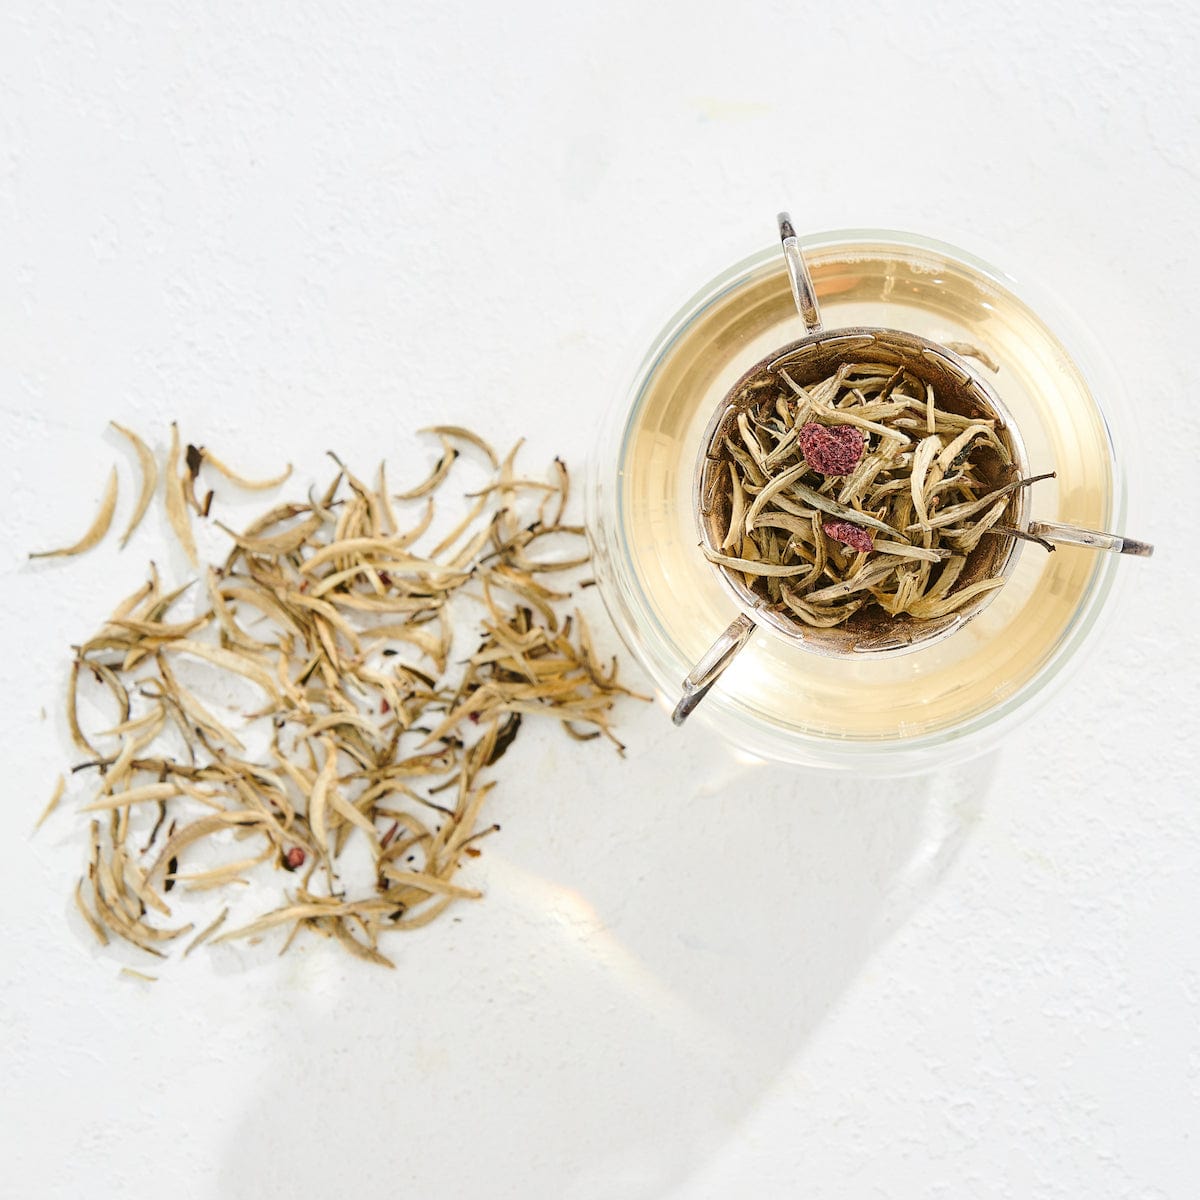 Overhead view of a cup filled with light-colored organic tea, with a metal strainer holding loose tea leaves inside it. To the left of the cup, a small pile of dry tea leaves is scattered on a white surface. The scene is brightly lit, capturing the essence of Club Magic Hour Raspberry Earl White Tea.